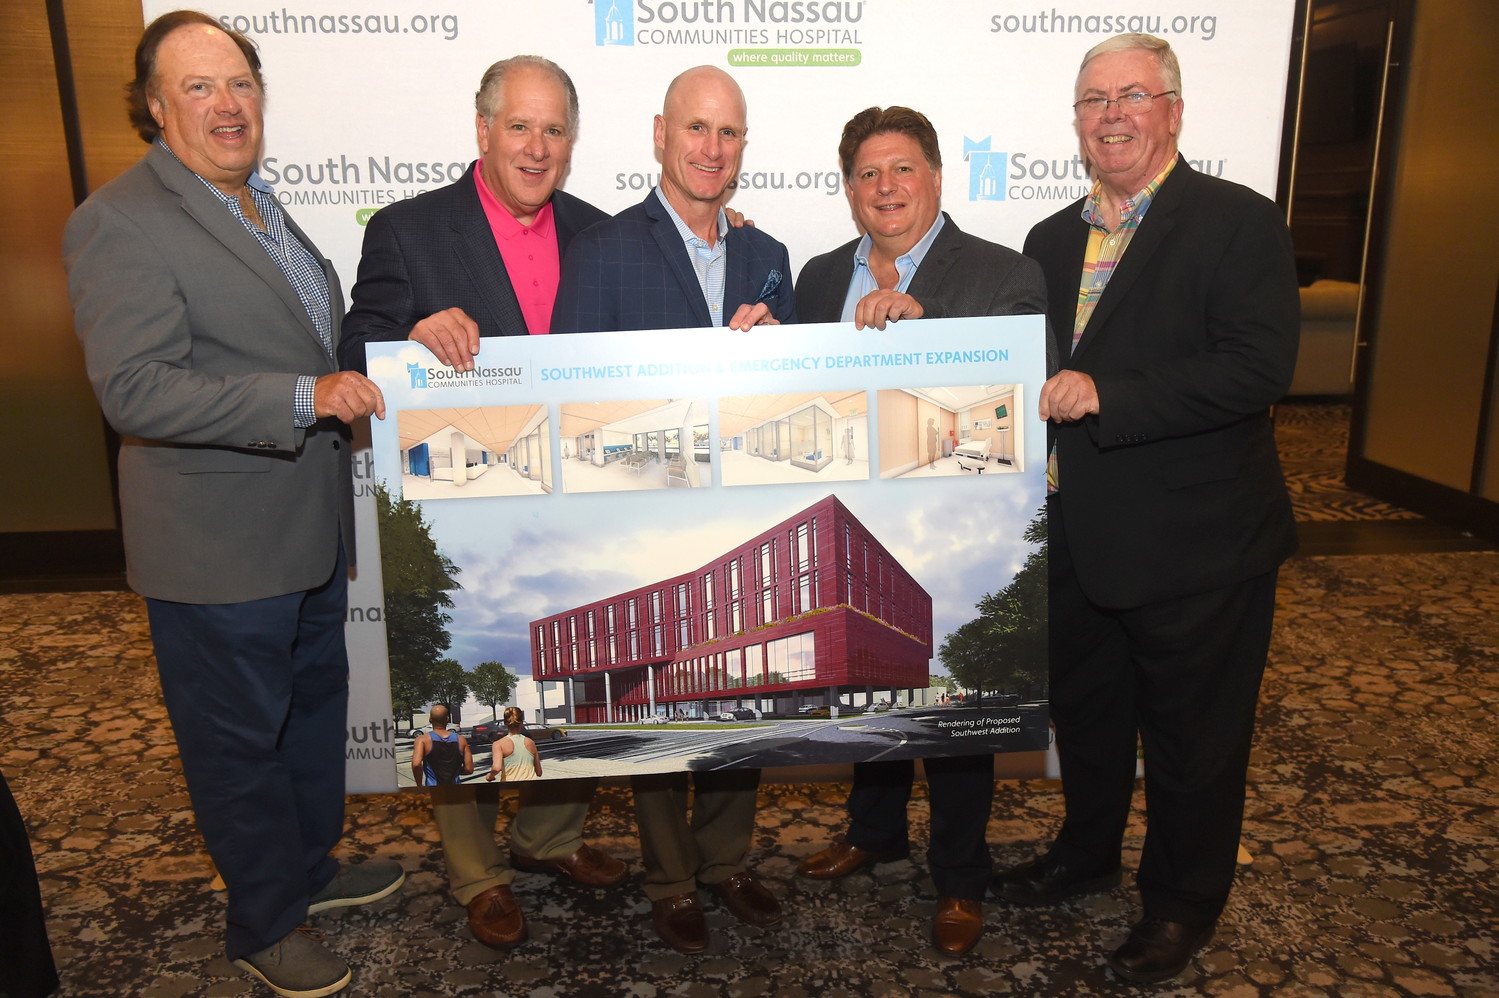 Golf outing co-chairs Jeff Greenfield, left, Tony Cancellieri, honorees Matt Whalen and Joel Schneider and South Nassau president and CEO Richard Murphy with a rendering of the hospital’s upcoming southwest addition.